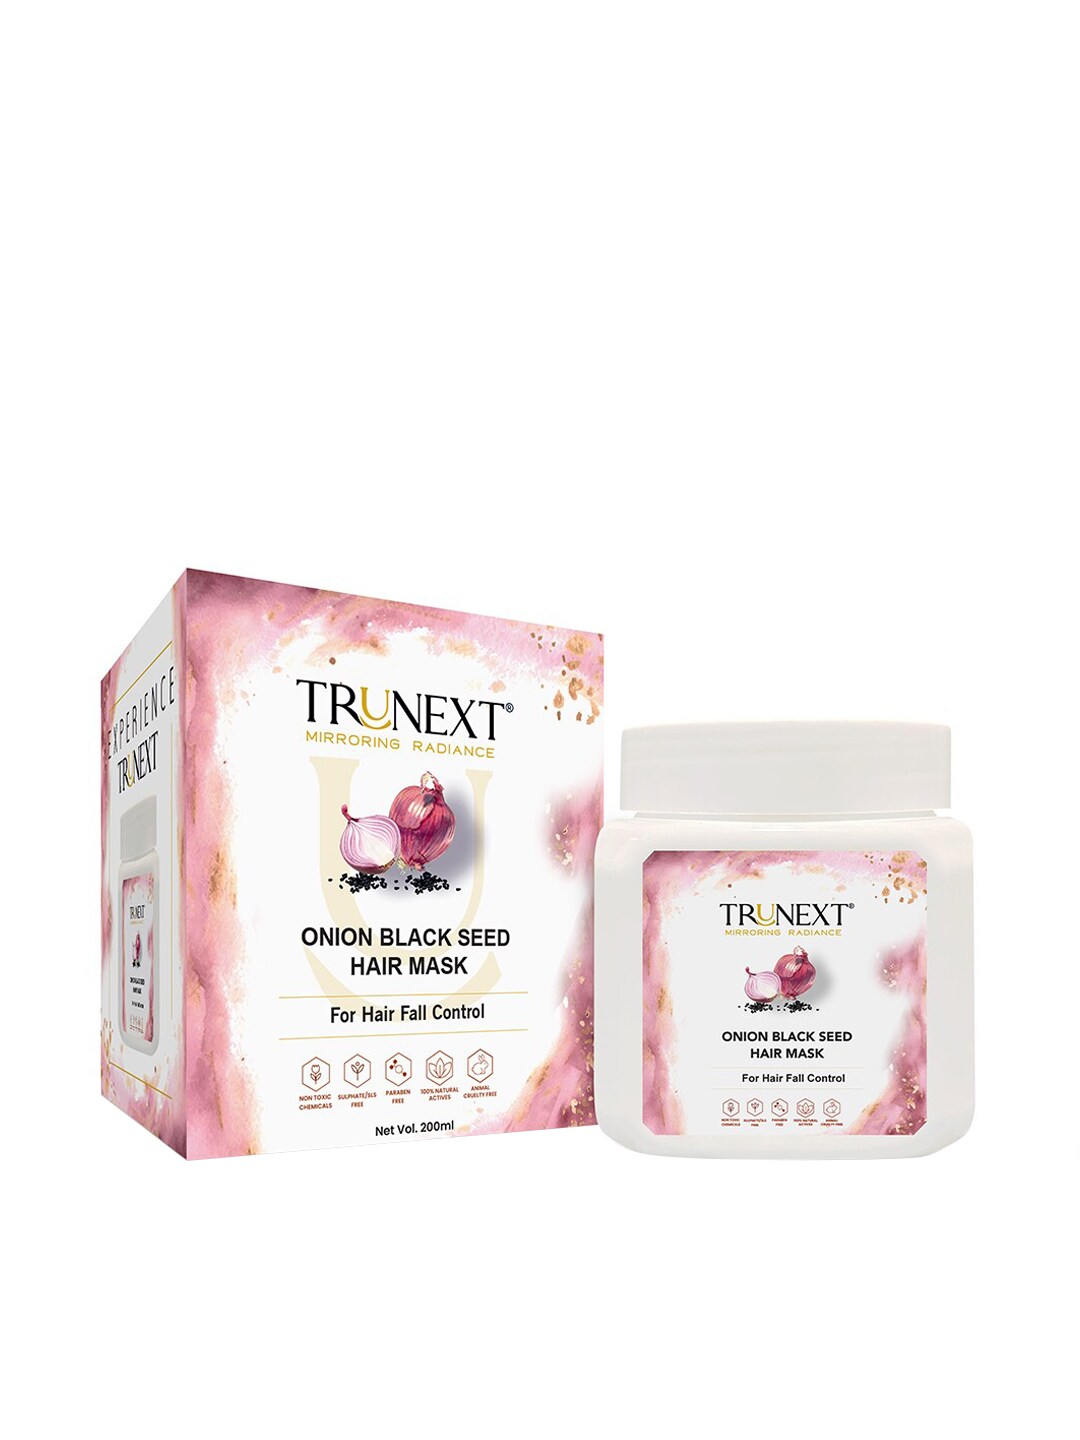 TRUNEXT Onion Black Seed Hair Mask for Hair Fall Control - 200ml Price in India